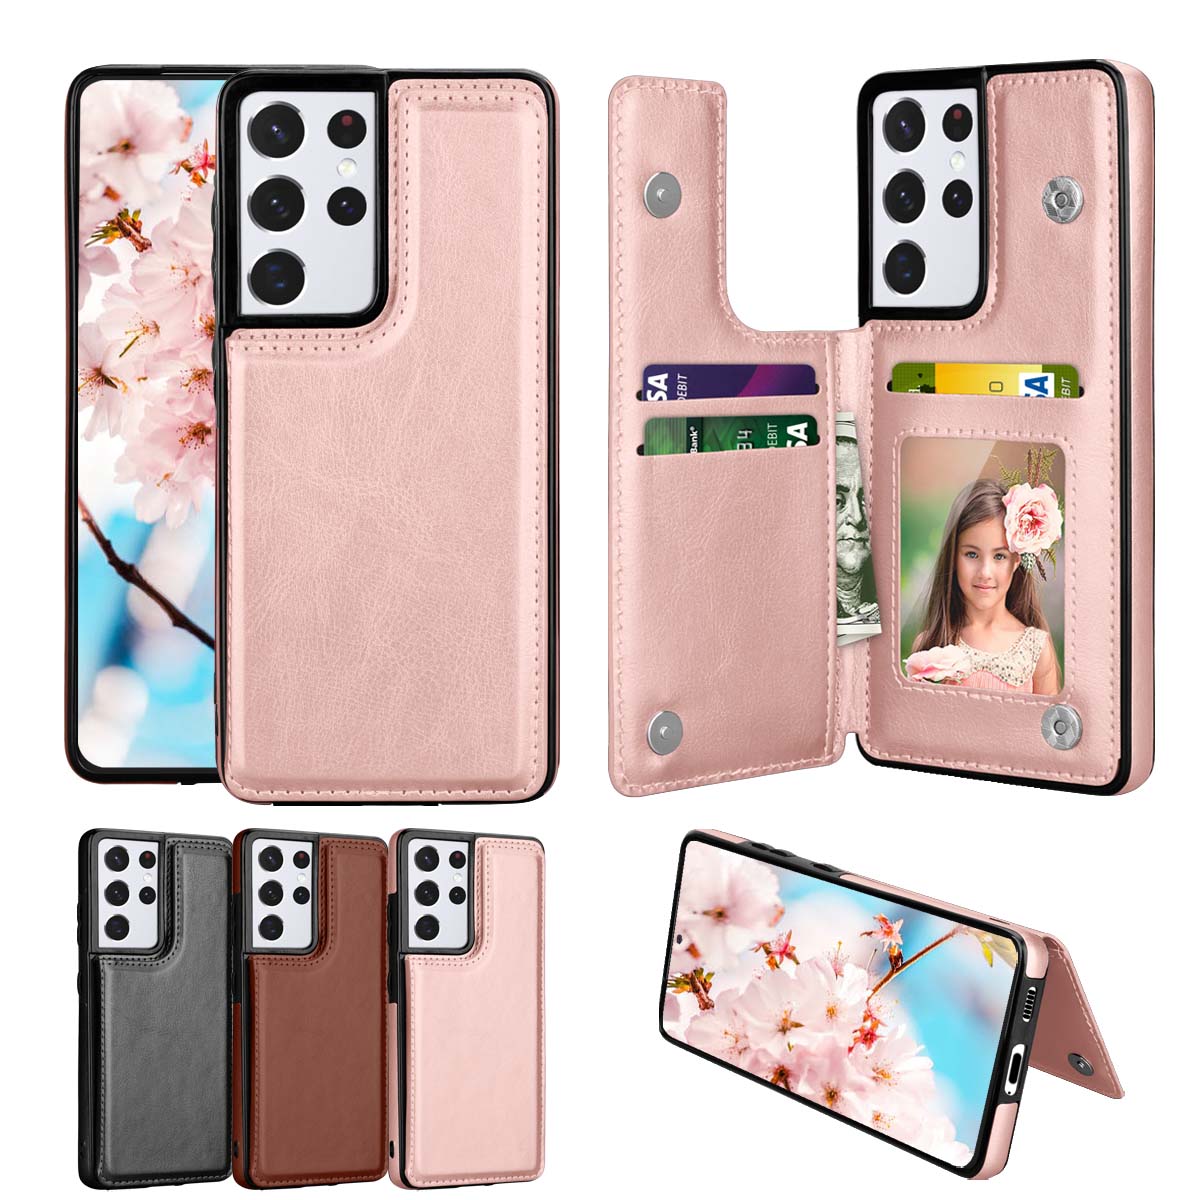 Galaxy S21 Case, Samsung Galaxy S21 Wallet Case, Takfox Shockproof PU Leather Case with Card Pockets 3 Cards Slots Cash ID Credit Card Flip Phone Cases Cover Kickstand Magnetic Hard Cases, Rose Gold - image 1 of 7